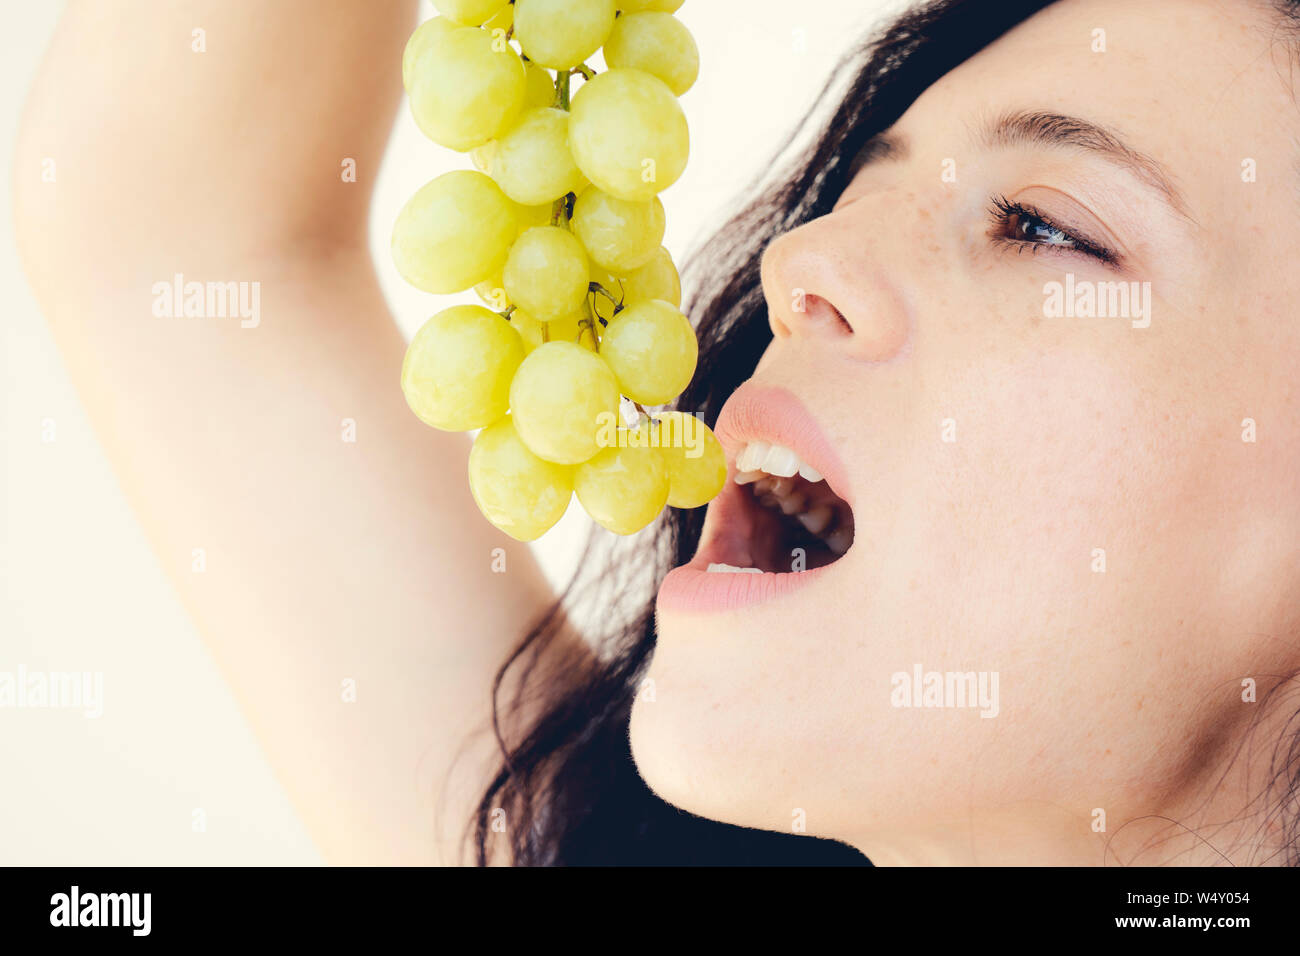 Attractive beautiful woman lifted her head up holding bunch grapes over mouth open Stock Photo